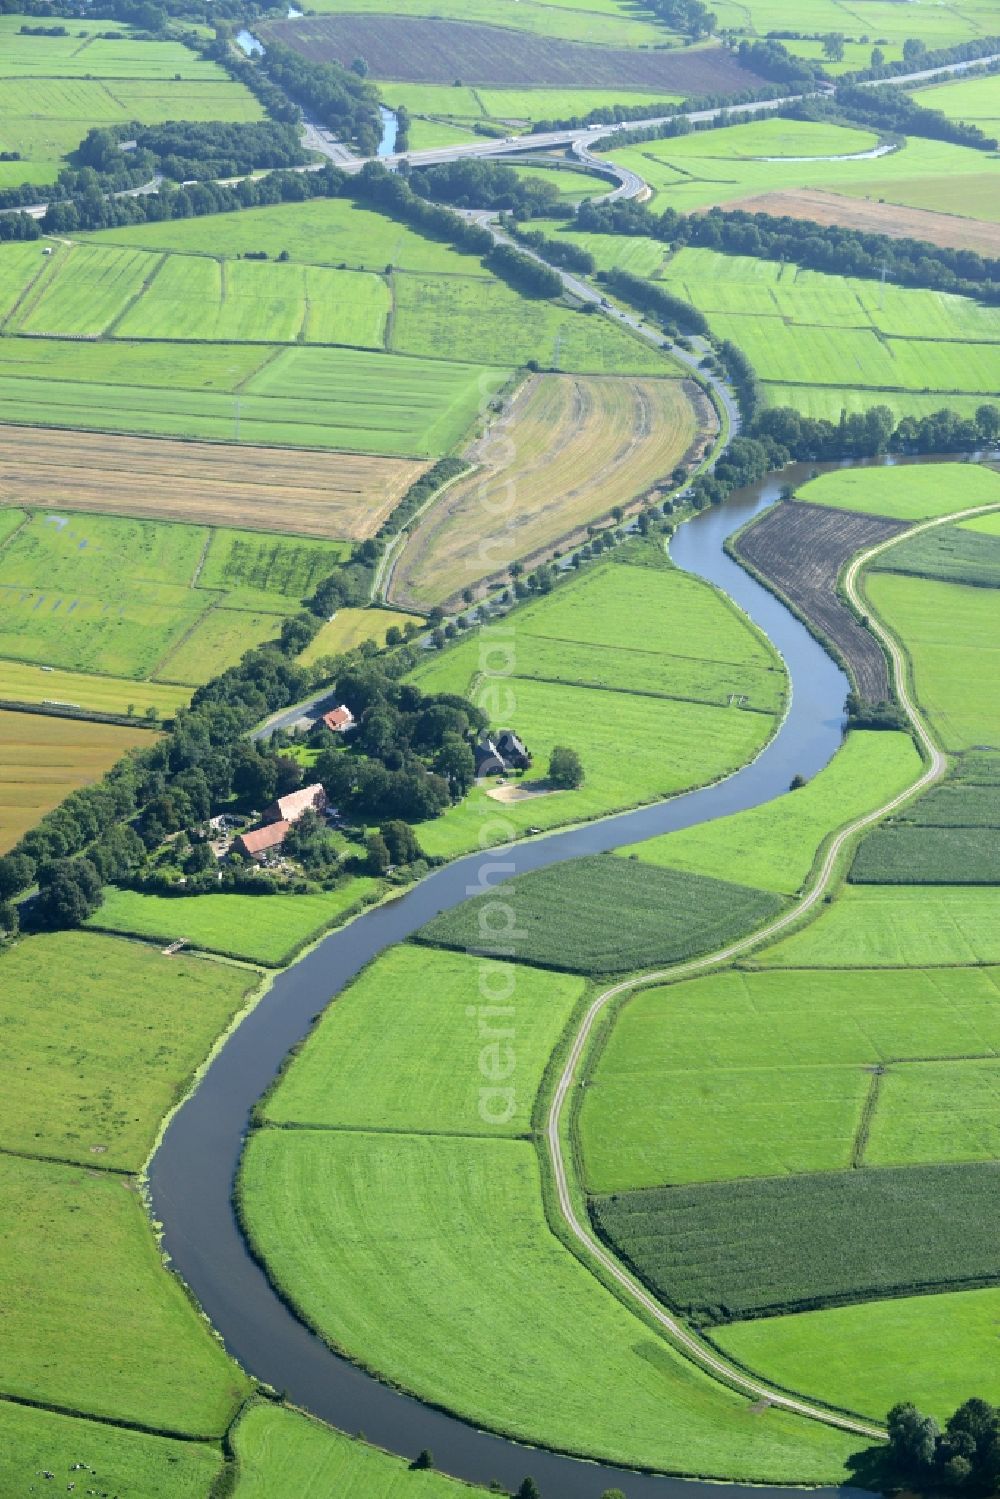 Loxstedt from the bird's eye view: Riparian zones on the course of the river Alte Lune in Loxstedt in the state Lower Saxony